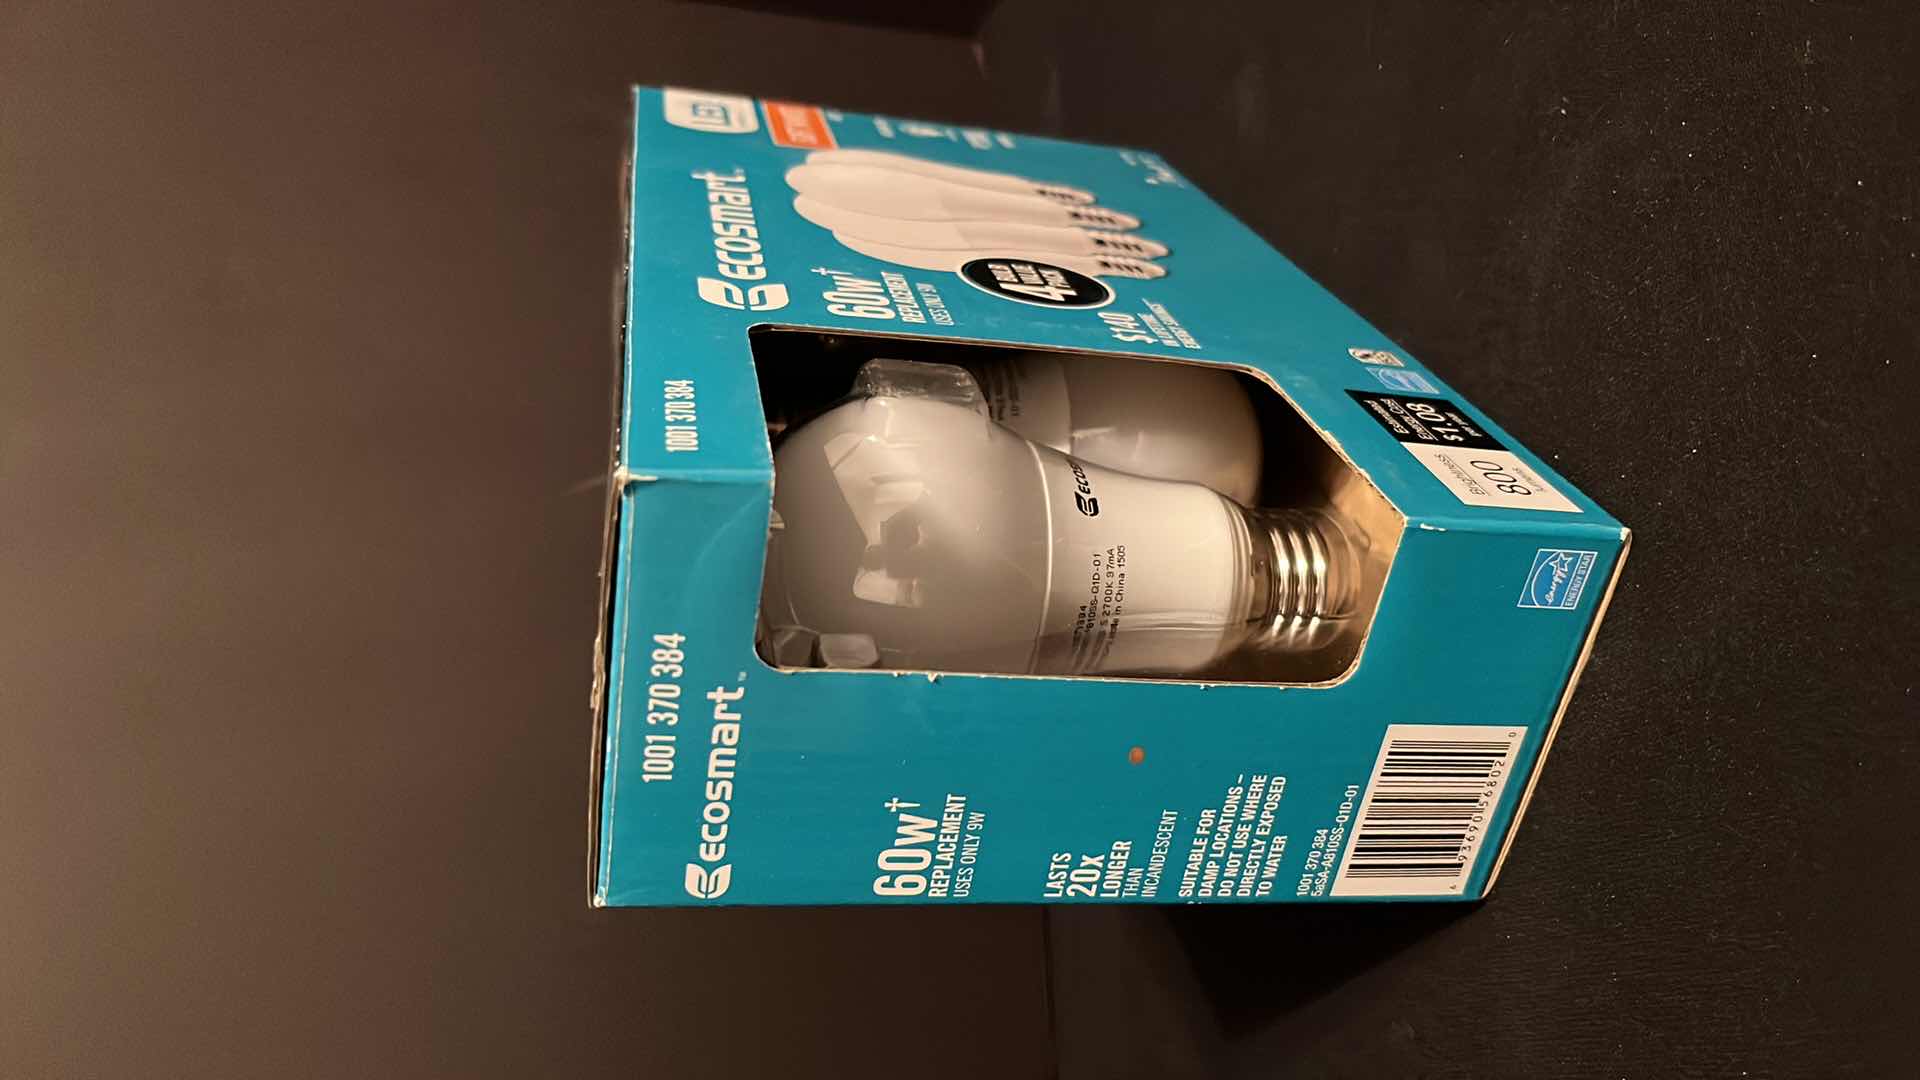 Photo 2 of NIB ECOSMART 4-PACK 60W A19 DIMMABLE ENERGY STAR LED LIGHT BULB SOFT WHITE & INTERMATIC AUTOMATIC LIGHT CONTROL DUSK TO DAWN LIGHT SENSING SOCKET CONVERTER, INDOOR/OUTDOOR 150W AT 120 VAC (MODEL NE1C)